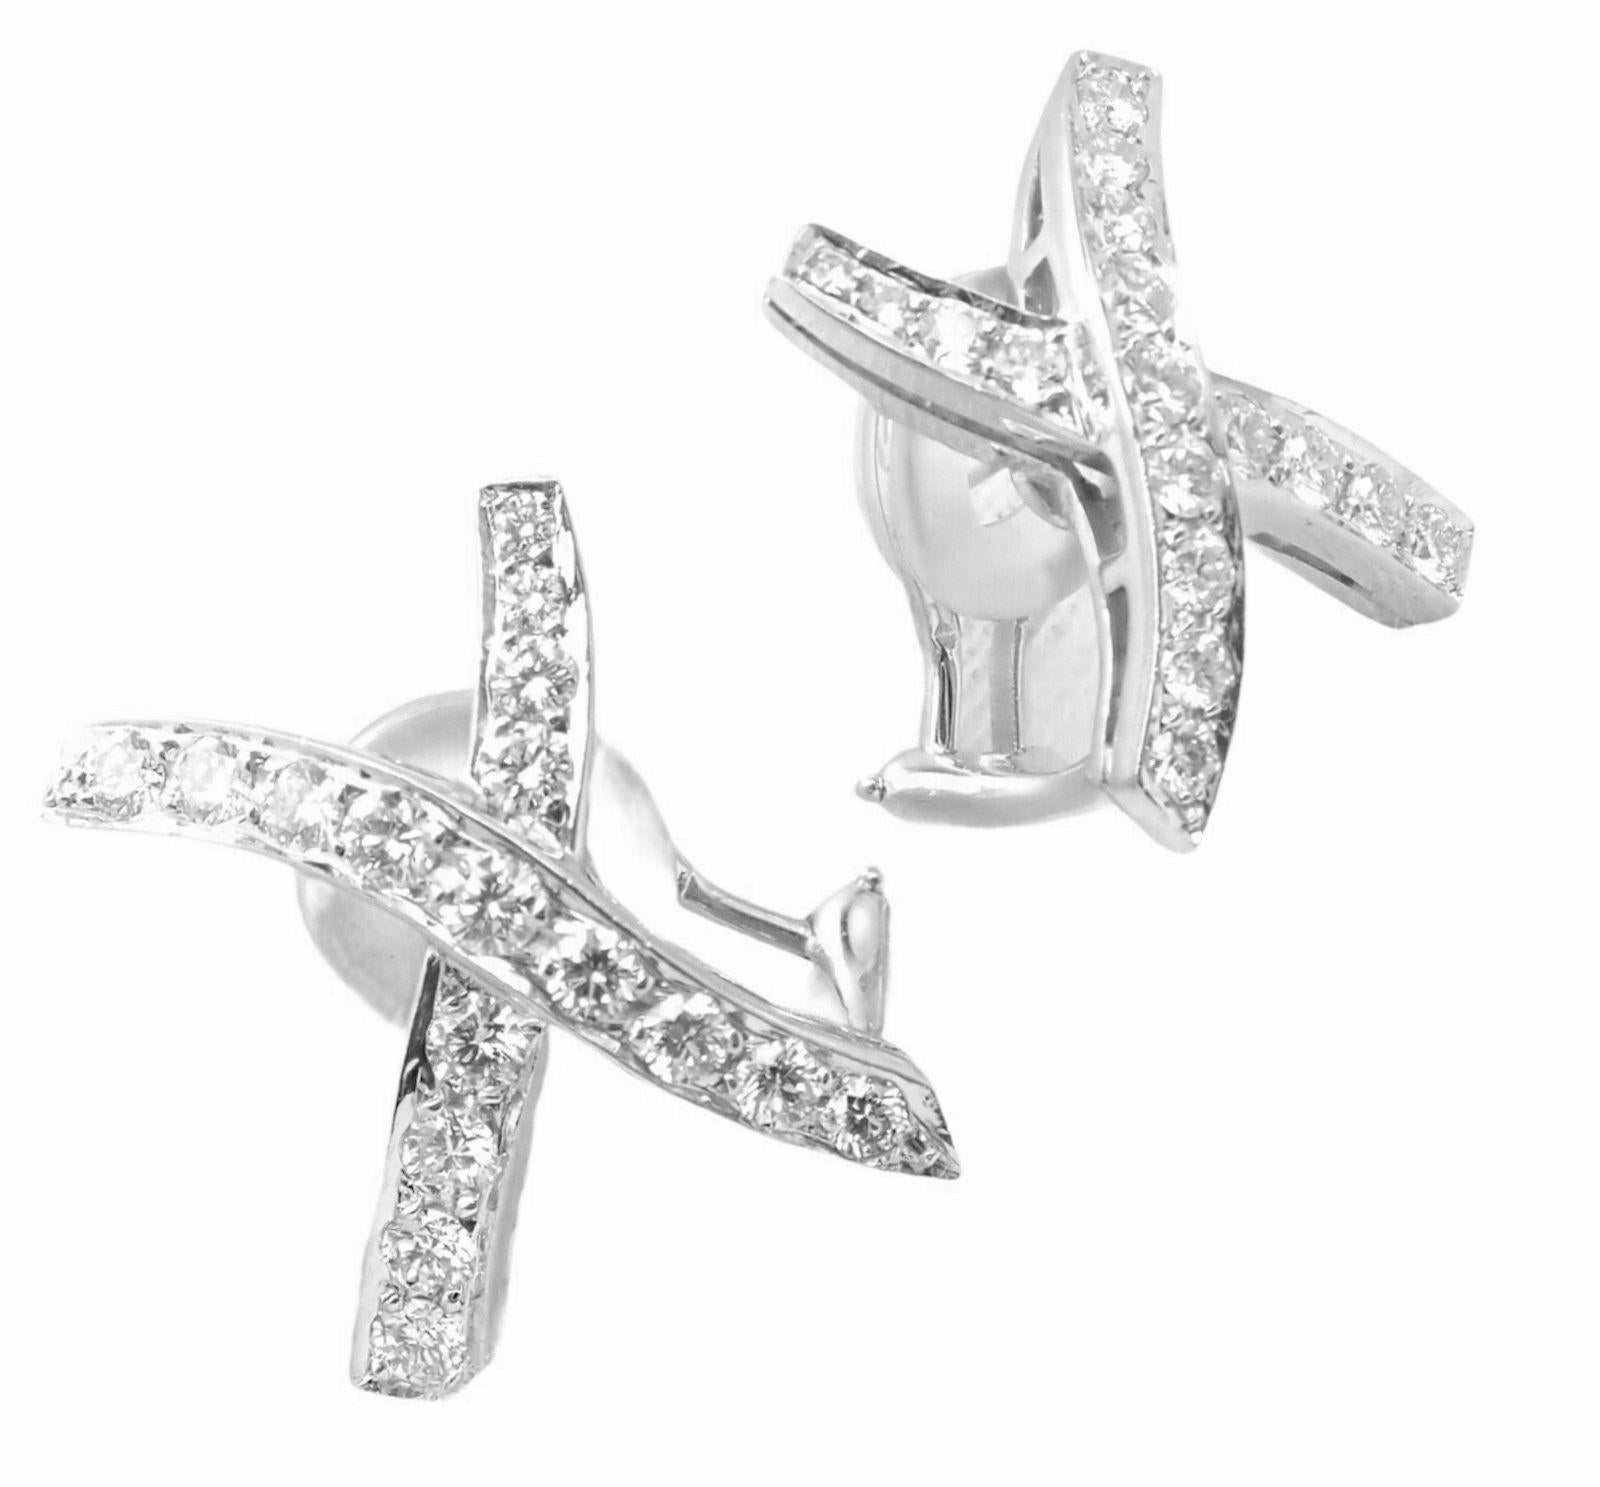 Platinum Diamond Crossover Loving X Earrings by Paloma Picasso for Tiffany & Co.
With 34 round brilliant cut diamonds VS1 clarity, G color total weight approximately 1ct 
These earrings are made for pierced ears.
Details: 
Measurements: 15mm x